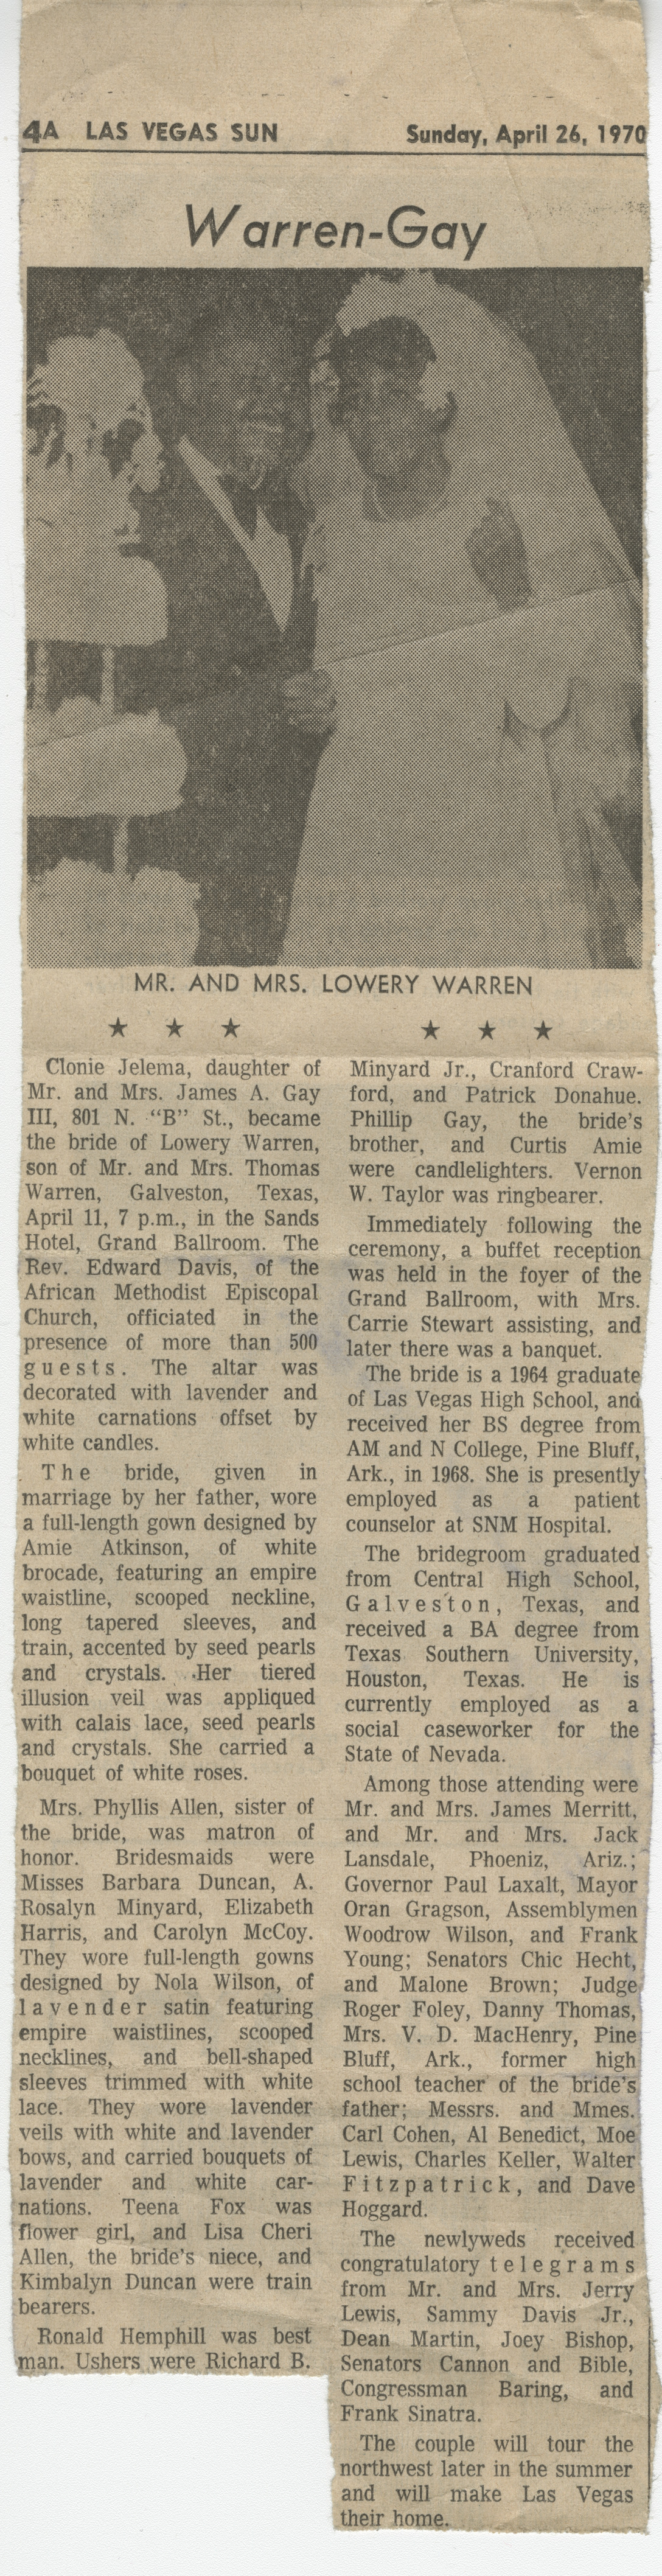 Newspaper clipping, Warren-Gay wedding announcement for Mrs. Clonie Jelema Gay, daughter of Mr. and Mrs. James Gay III, and Lowery Warren, Las Vegas Sun, April 26, 1970 (wedding date: April 11, 1970)